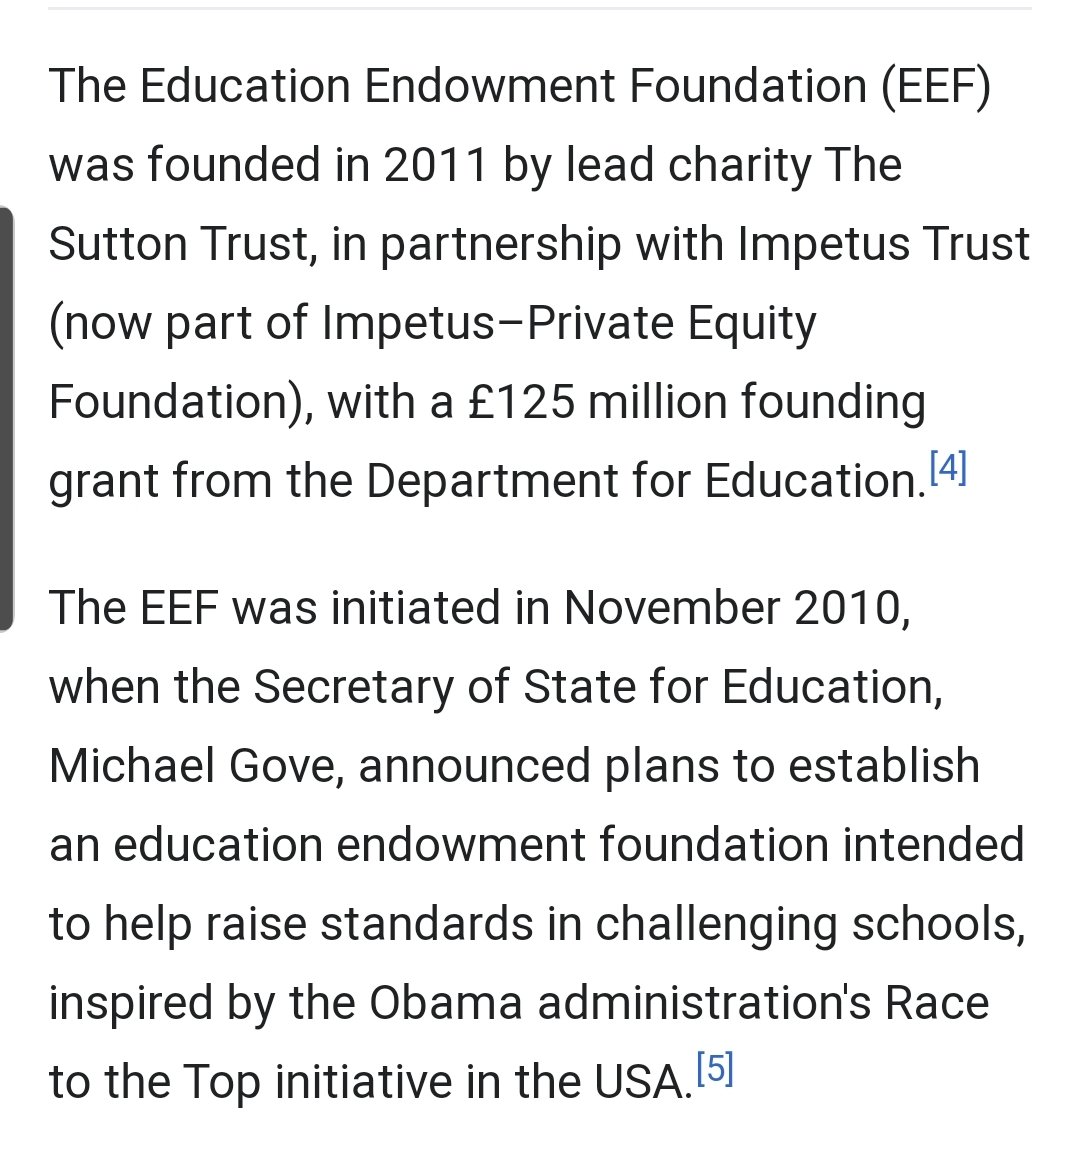 Interesting the groups that are involved in lobbying and organising this initiative.Lots of charities funded by private equity. For instance the EEF was set up by Gove with government money7/